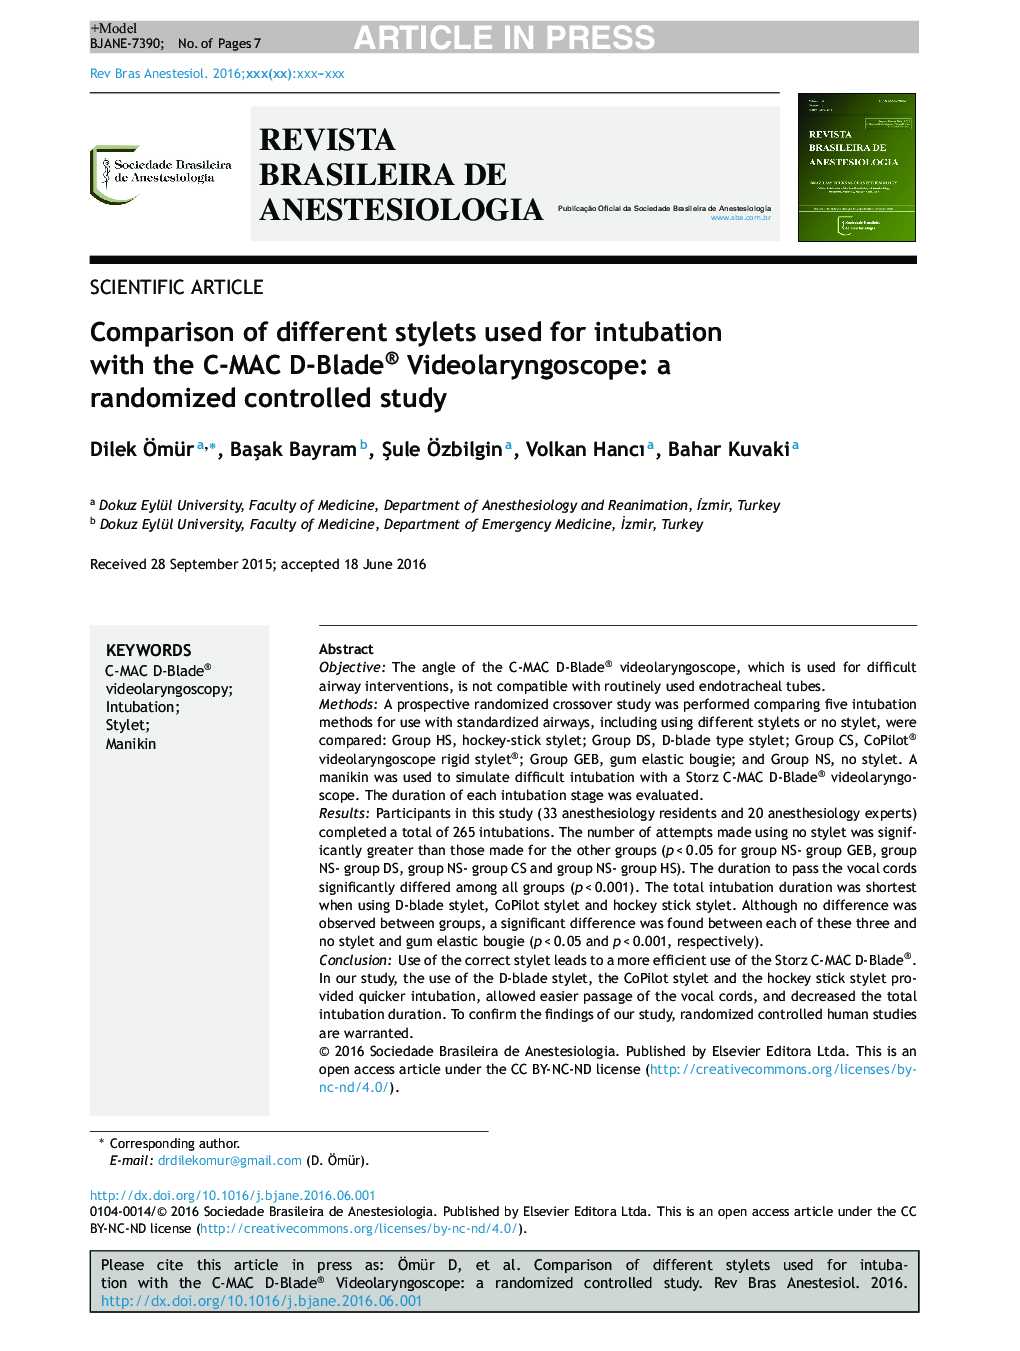 Comparison of different stylets used for intubation with the C-MAC D-Blade® Videolaryngoscope: a randomized controlled study